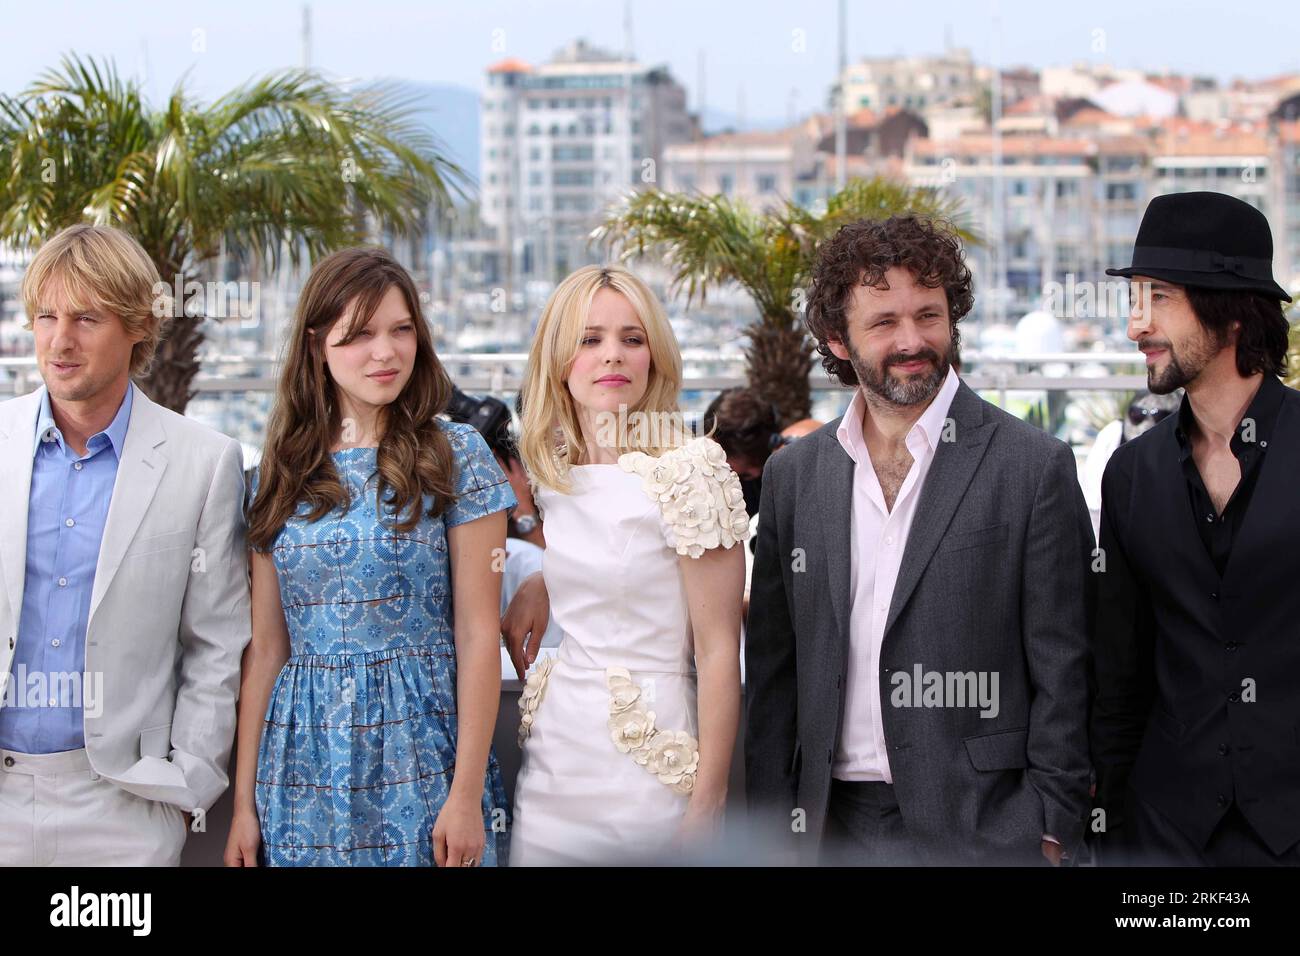 Bildnummer: 55338795  Datum: 11.05.2011  Copyright: imago/Xinhua (110511) -- CANNES, May 11, 2011 (Xinhua) -- (L-R) US actor Owen Wilson, French actress Lea Seydoux, Canadian actress Rachel McAdams, British actor Michael Sheen, and US actor Adrien Brody attend a photocall for the film Midnight in Paris at the 64th Cannes Film Festival in Cannes, France, on May 11, 2011. The 64th Cannes Film Festival will be held from May 11 to 22. (Xinhua/Gao Jing) (zcc) FRANCE-CANNES-FILM FESTIVAL-MIDNIGHT IN PARIS PUBLICATIONxNOTxINxCHN Kultur Entertainment People Film 64. Internationale Filmfestspiele Canne Stock Photo